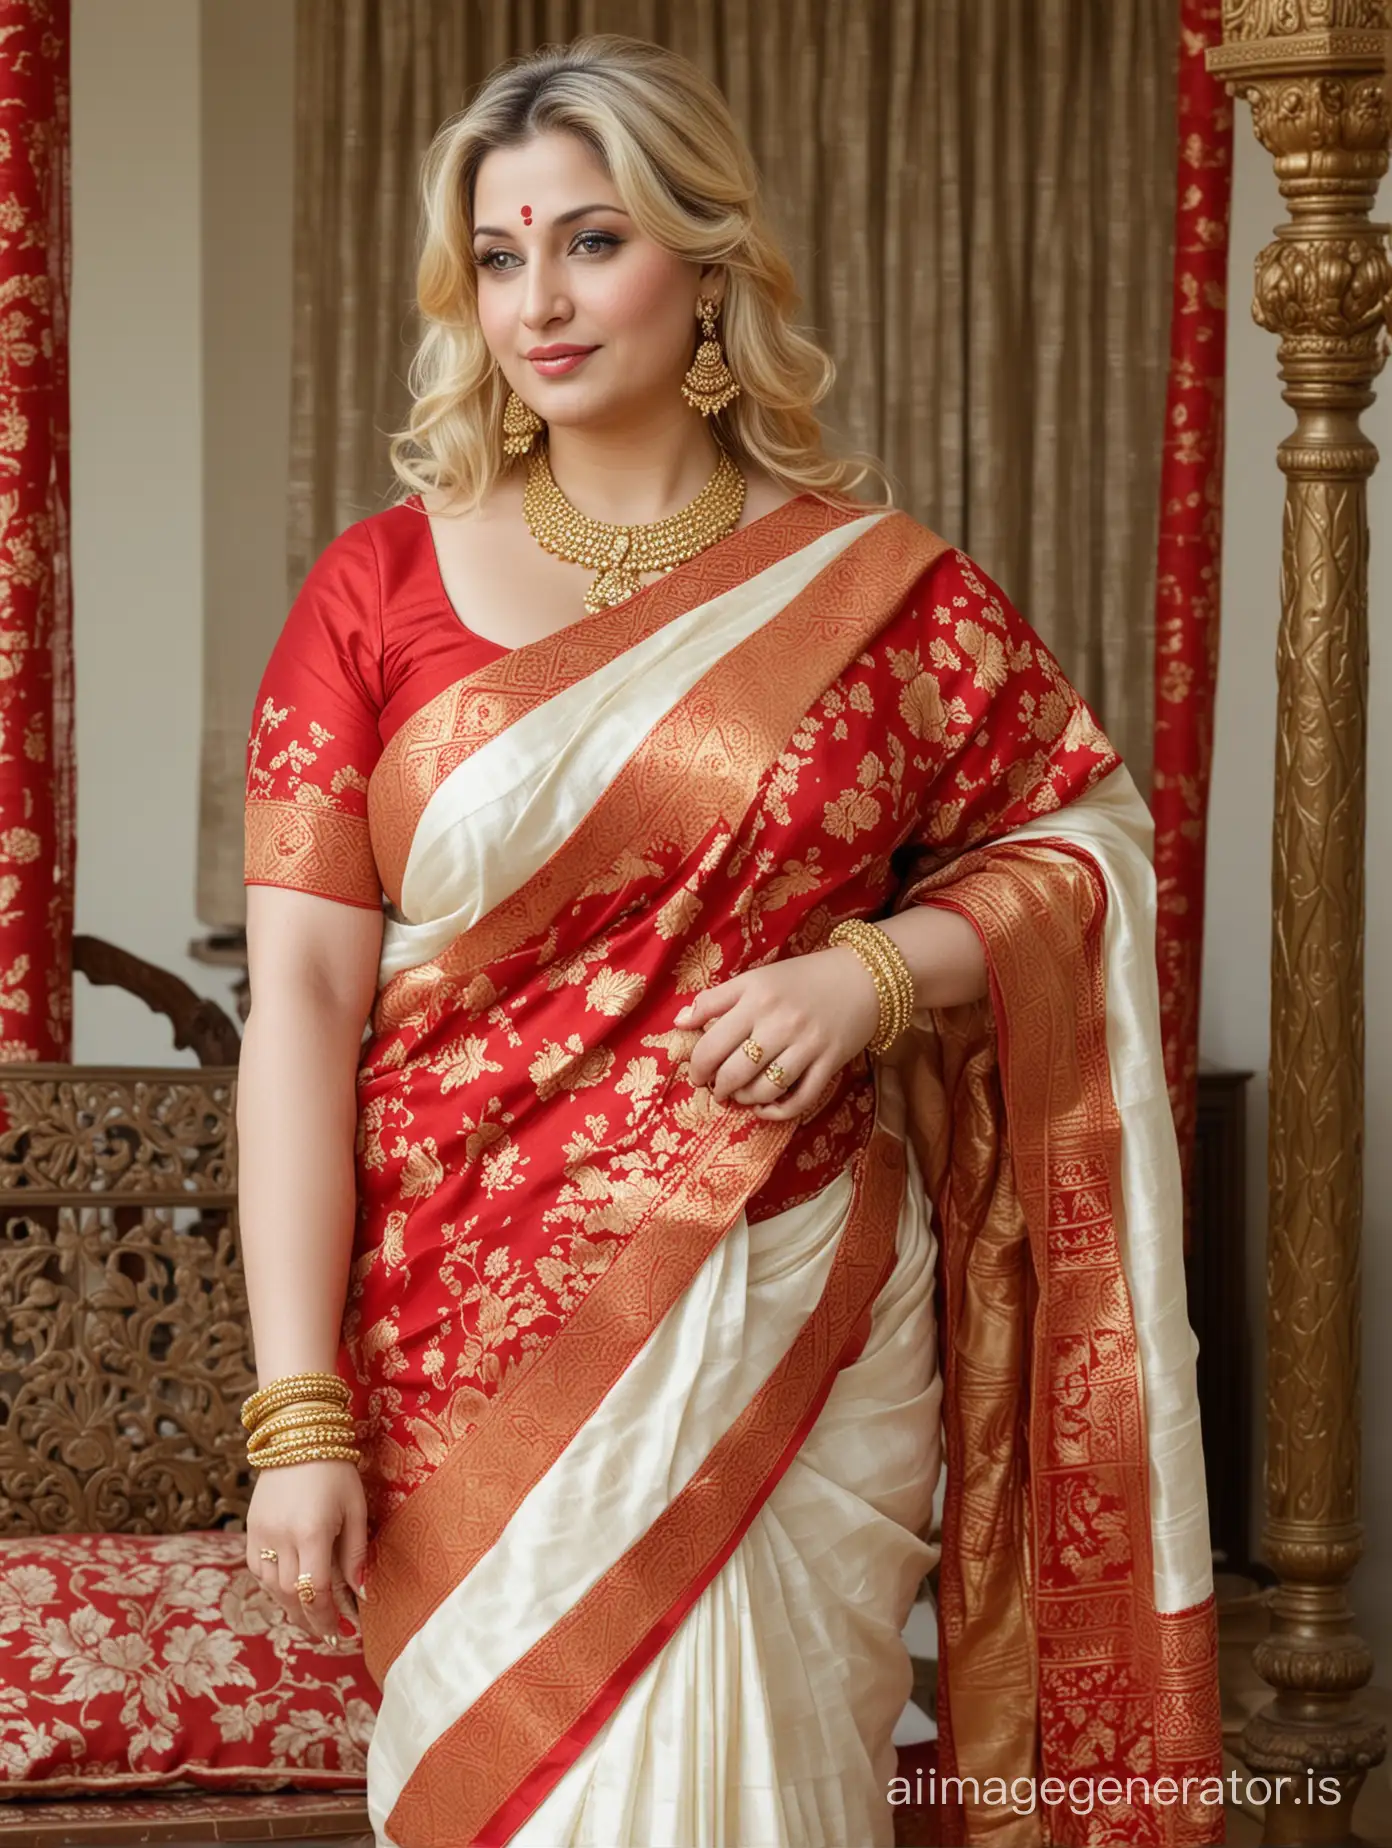 Generate full body image of a 41 year old very busty fatty breast, big fatty thighs, big fatty hand arm, big fatty ass and curvy completely American mature fatty chubby obese very fair white skin woman blonde hair wearing traditional style banarasi saree and wearing sindur in forehead and red and white bangles in hand and wearing gold necklace with gold jewelry in india puja program